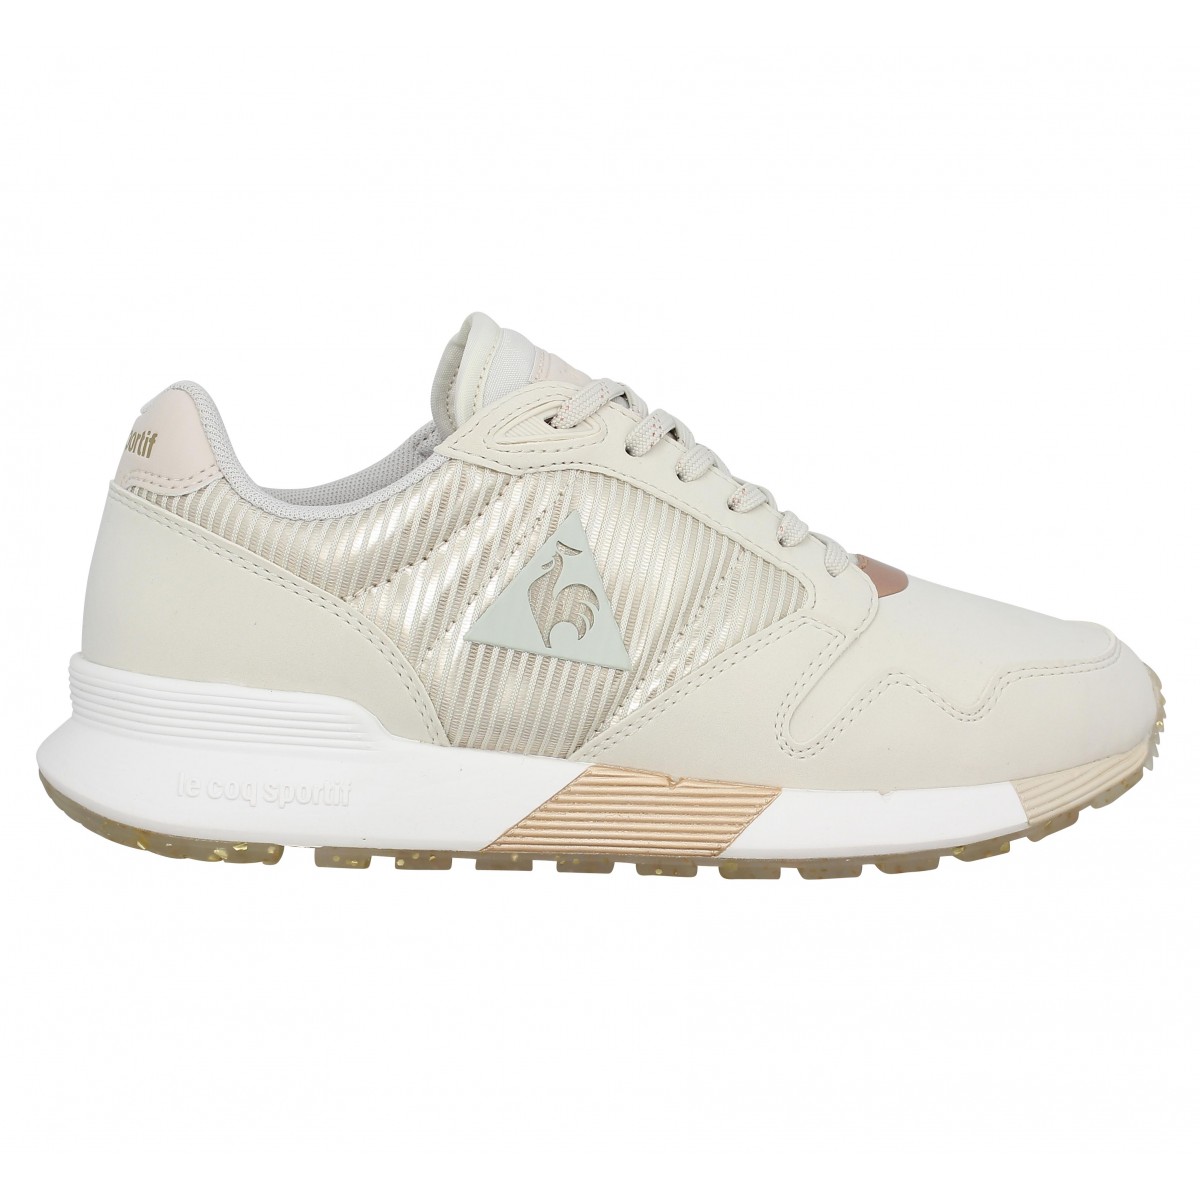 laden Mars Guinness Le coq sportif omega x striped toile femme beige femme | Fanny chaussures